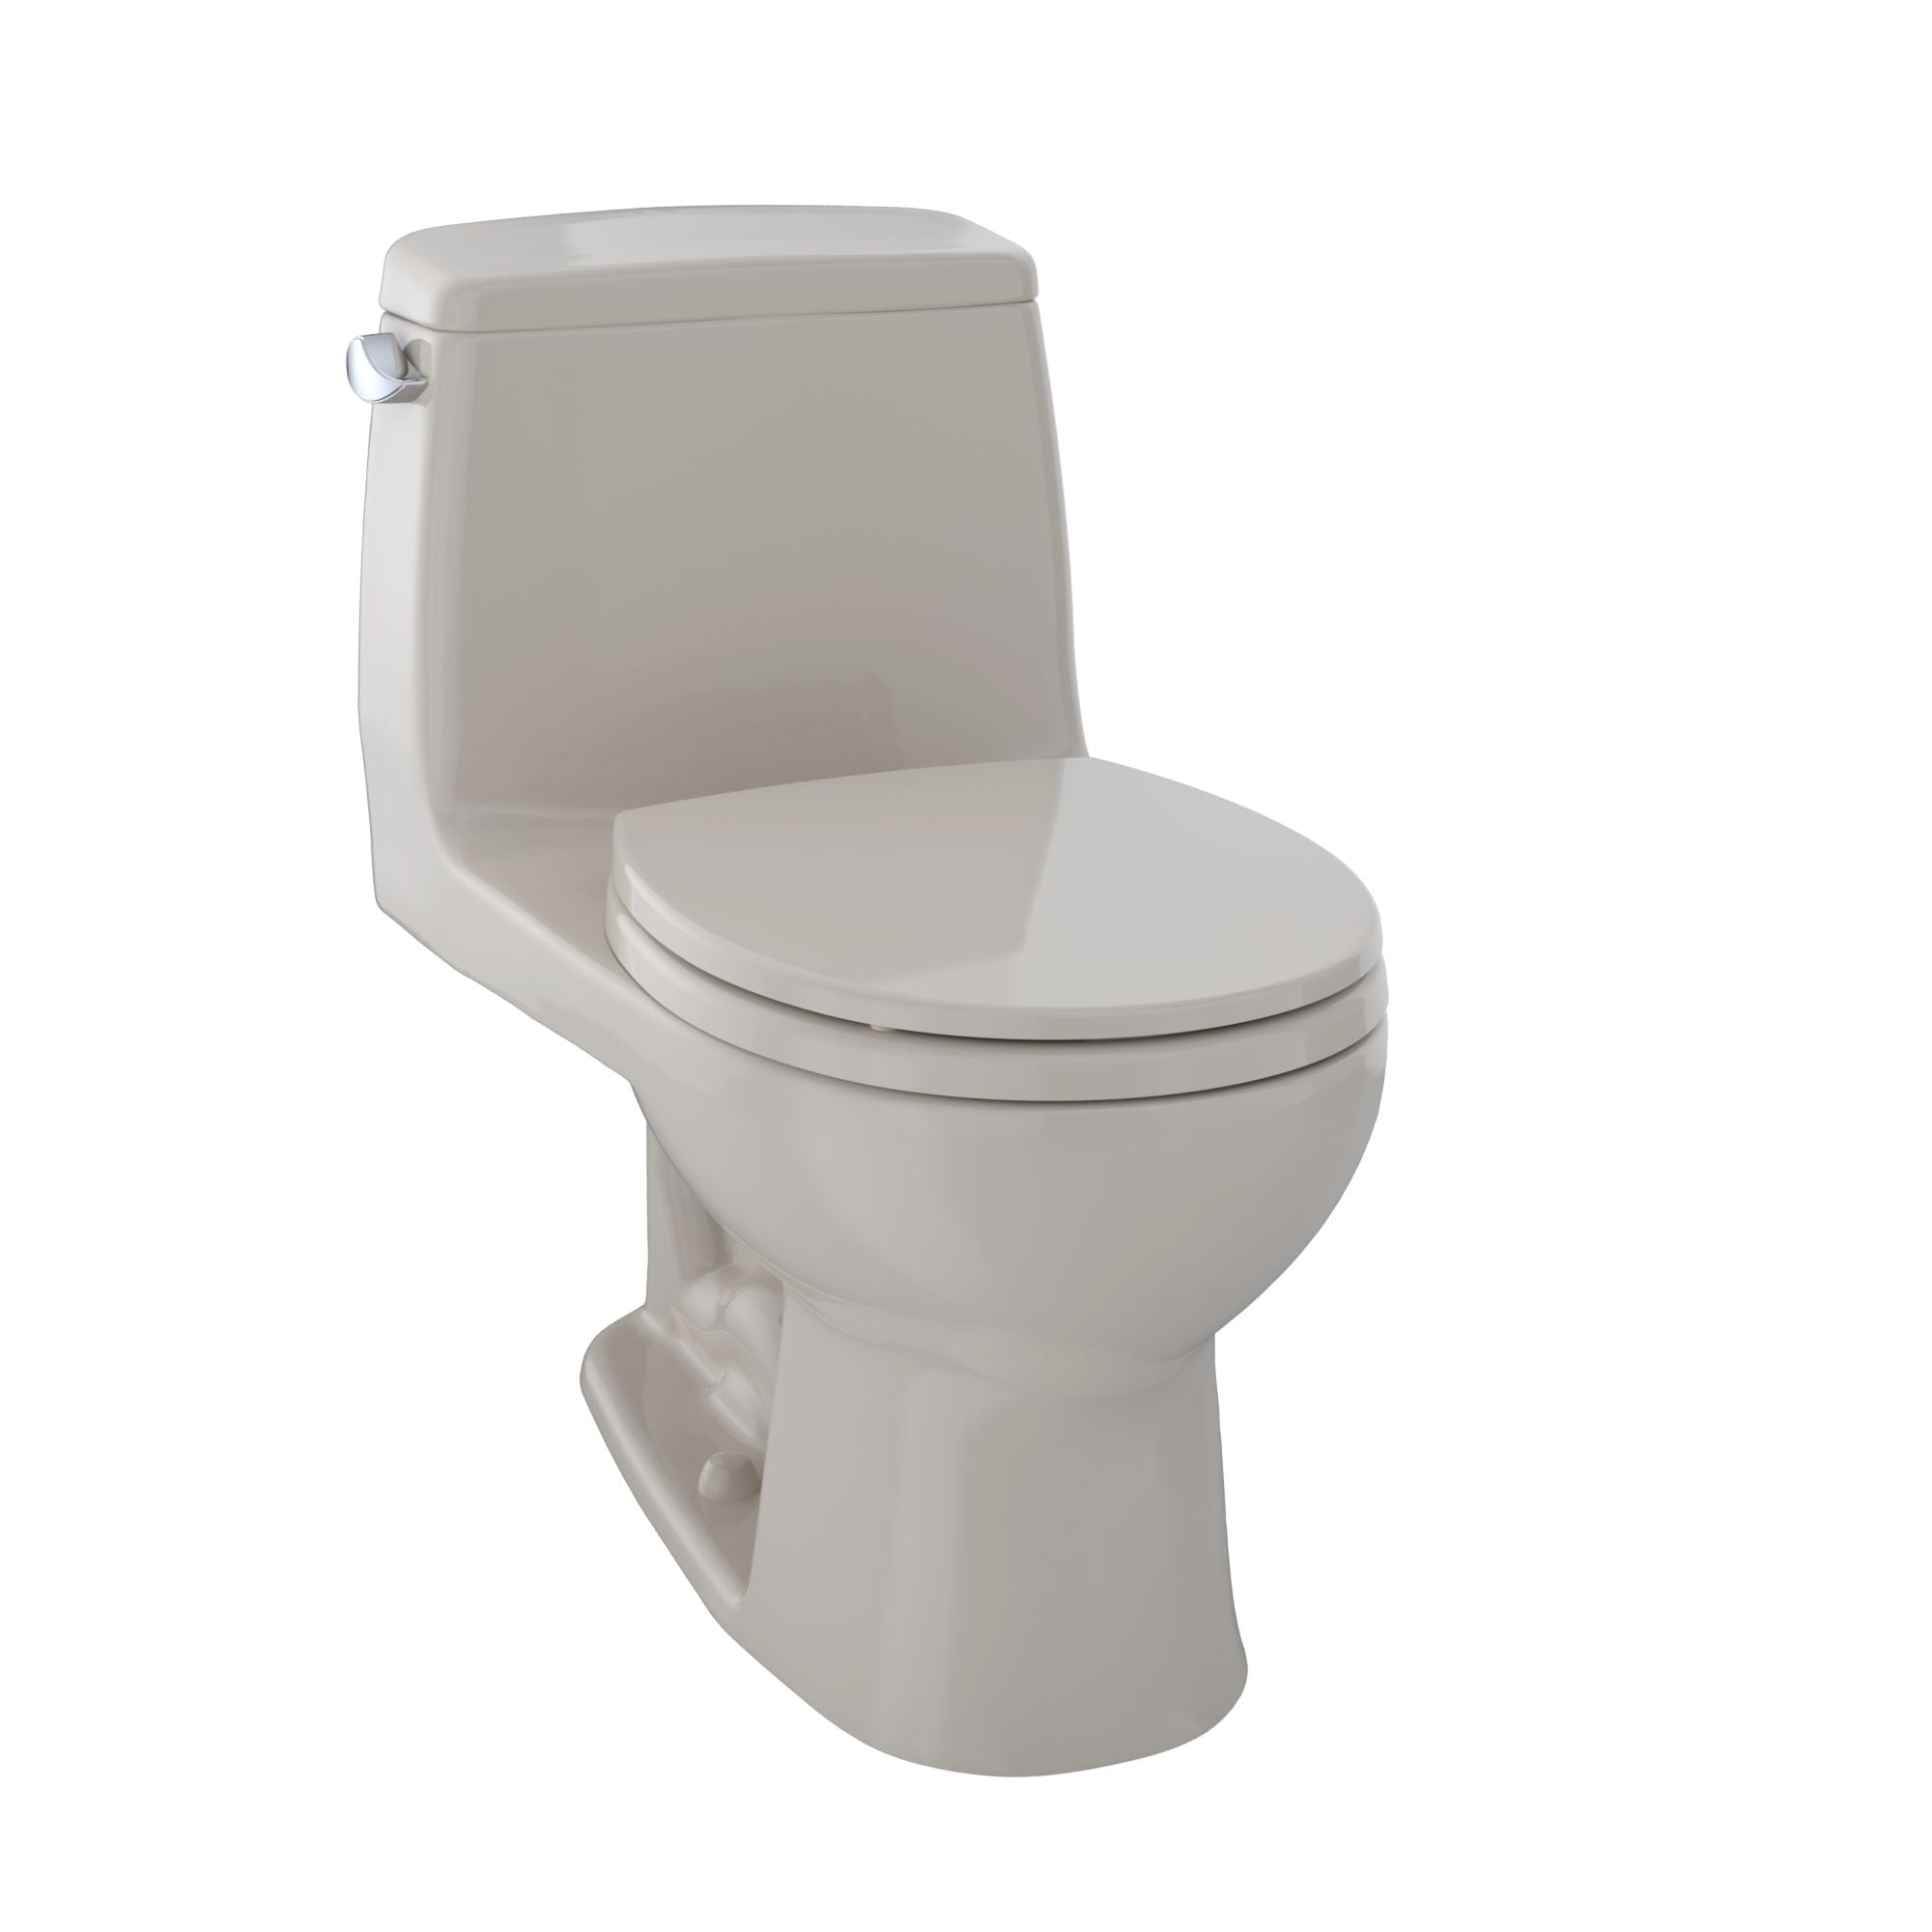 Toto Ultramax One-piece Toilet 1.6 GPF Round Bowl